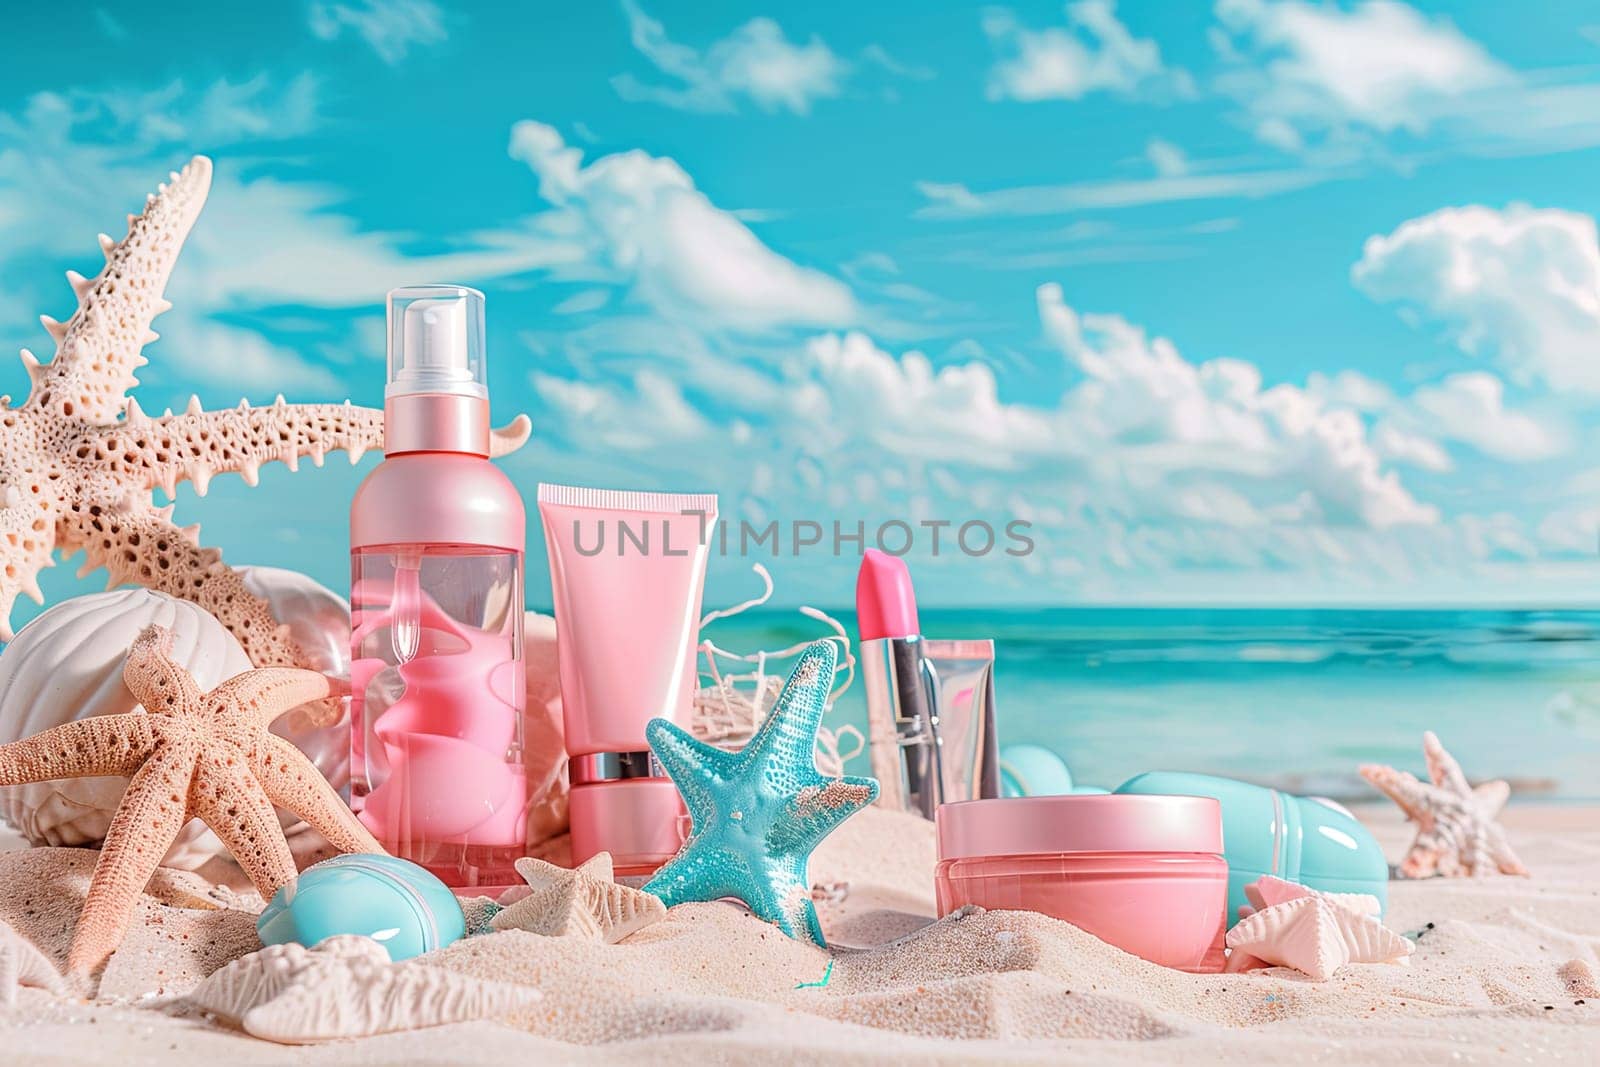 A beach scene featuring a starfish, cosmetics, and other summer items under the sun against a seascape backdrop.